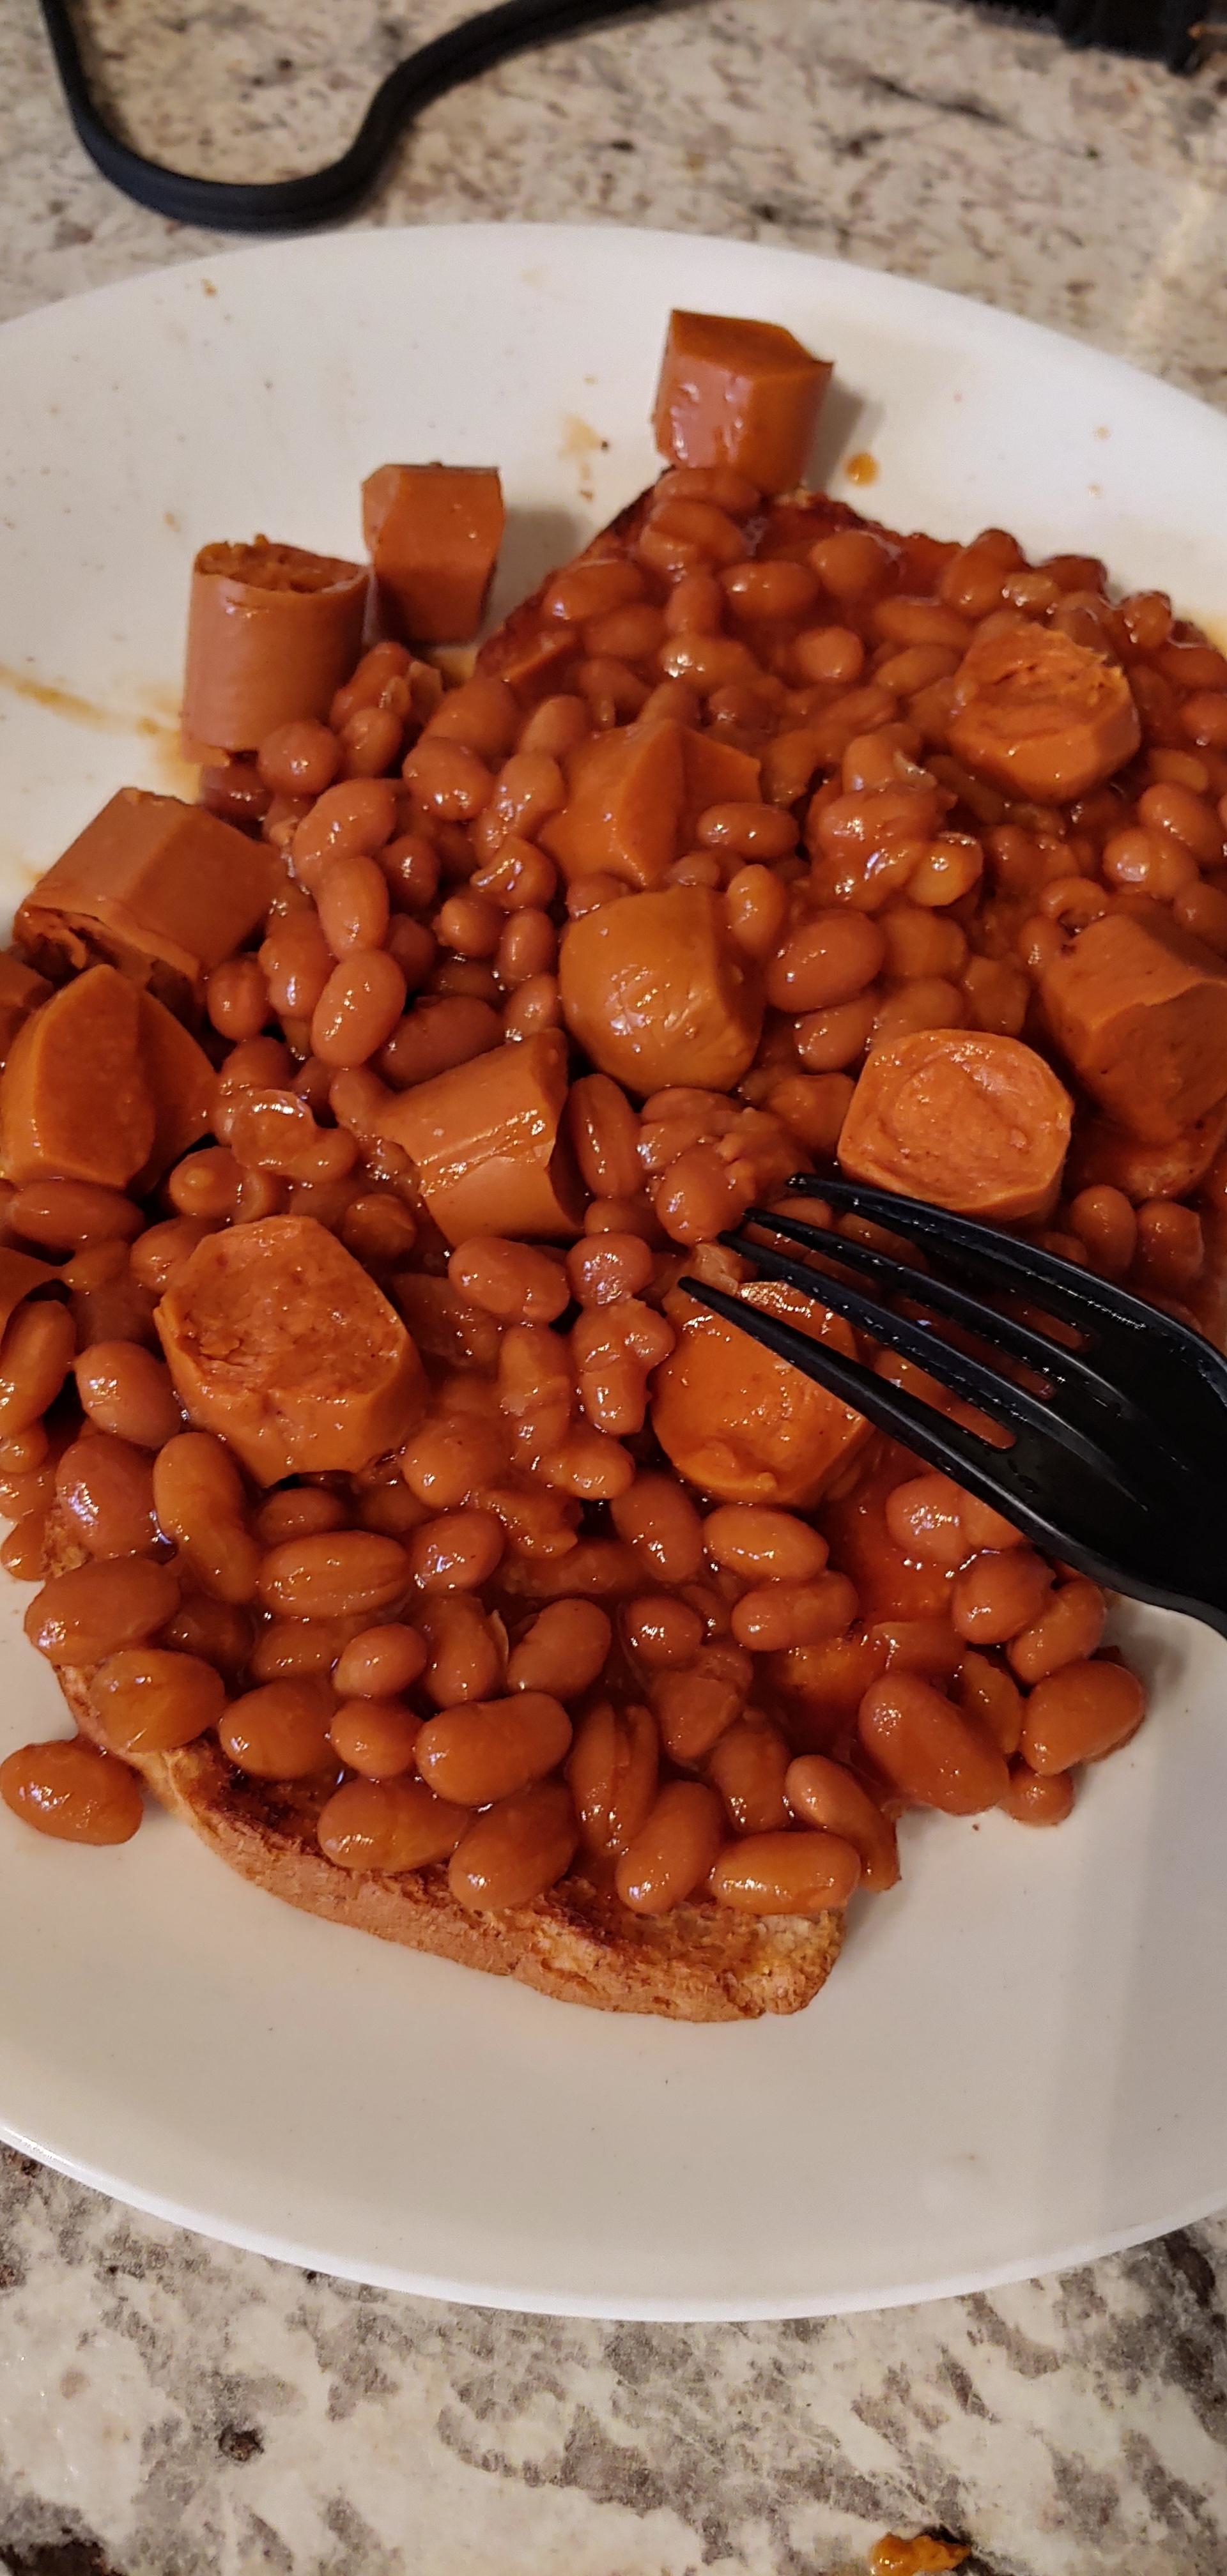 A plate of baked beans and sliced hot dogs with a black fork